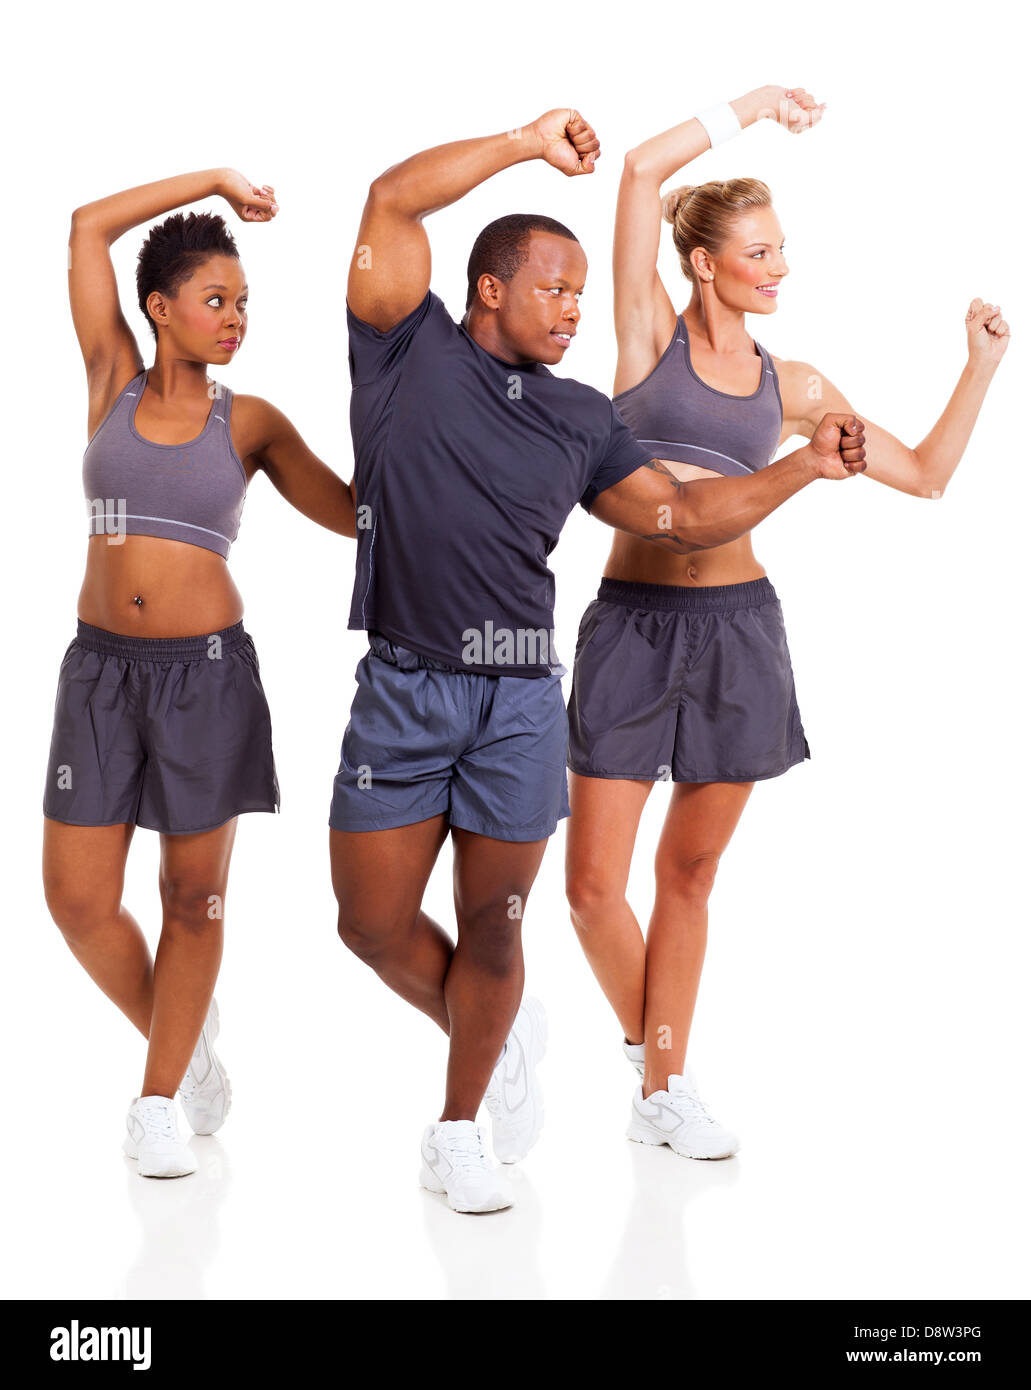 cheerful young adults working out over white background Stock Photo